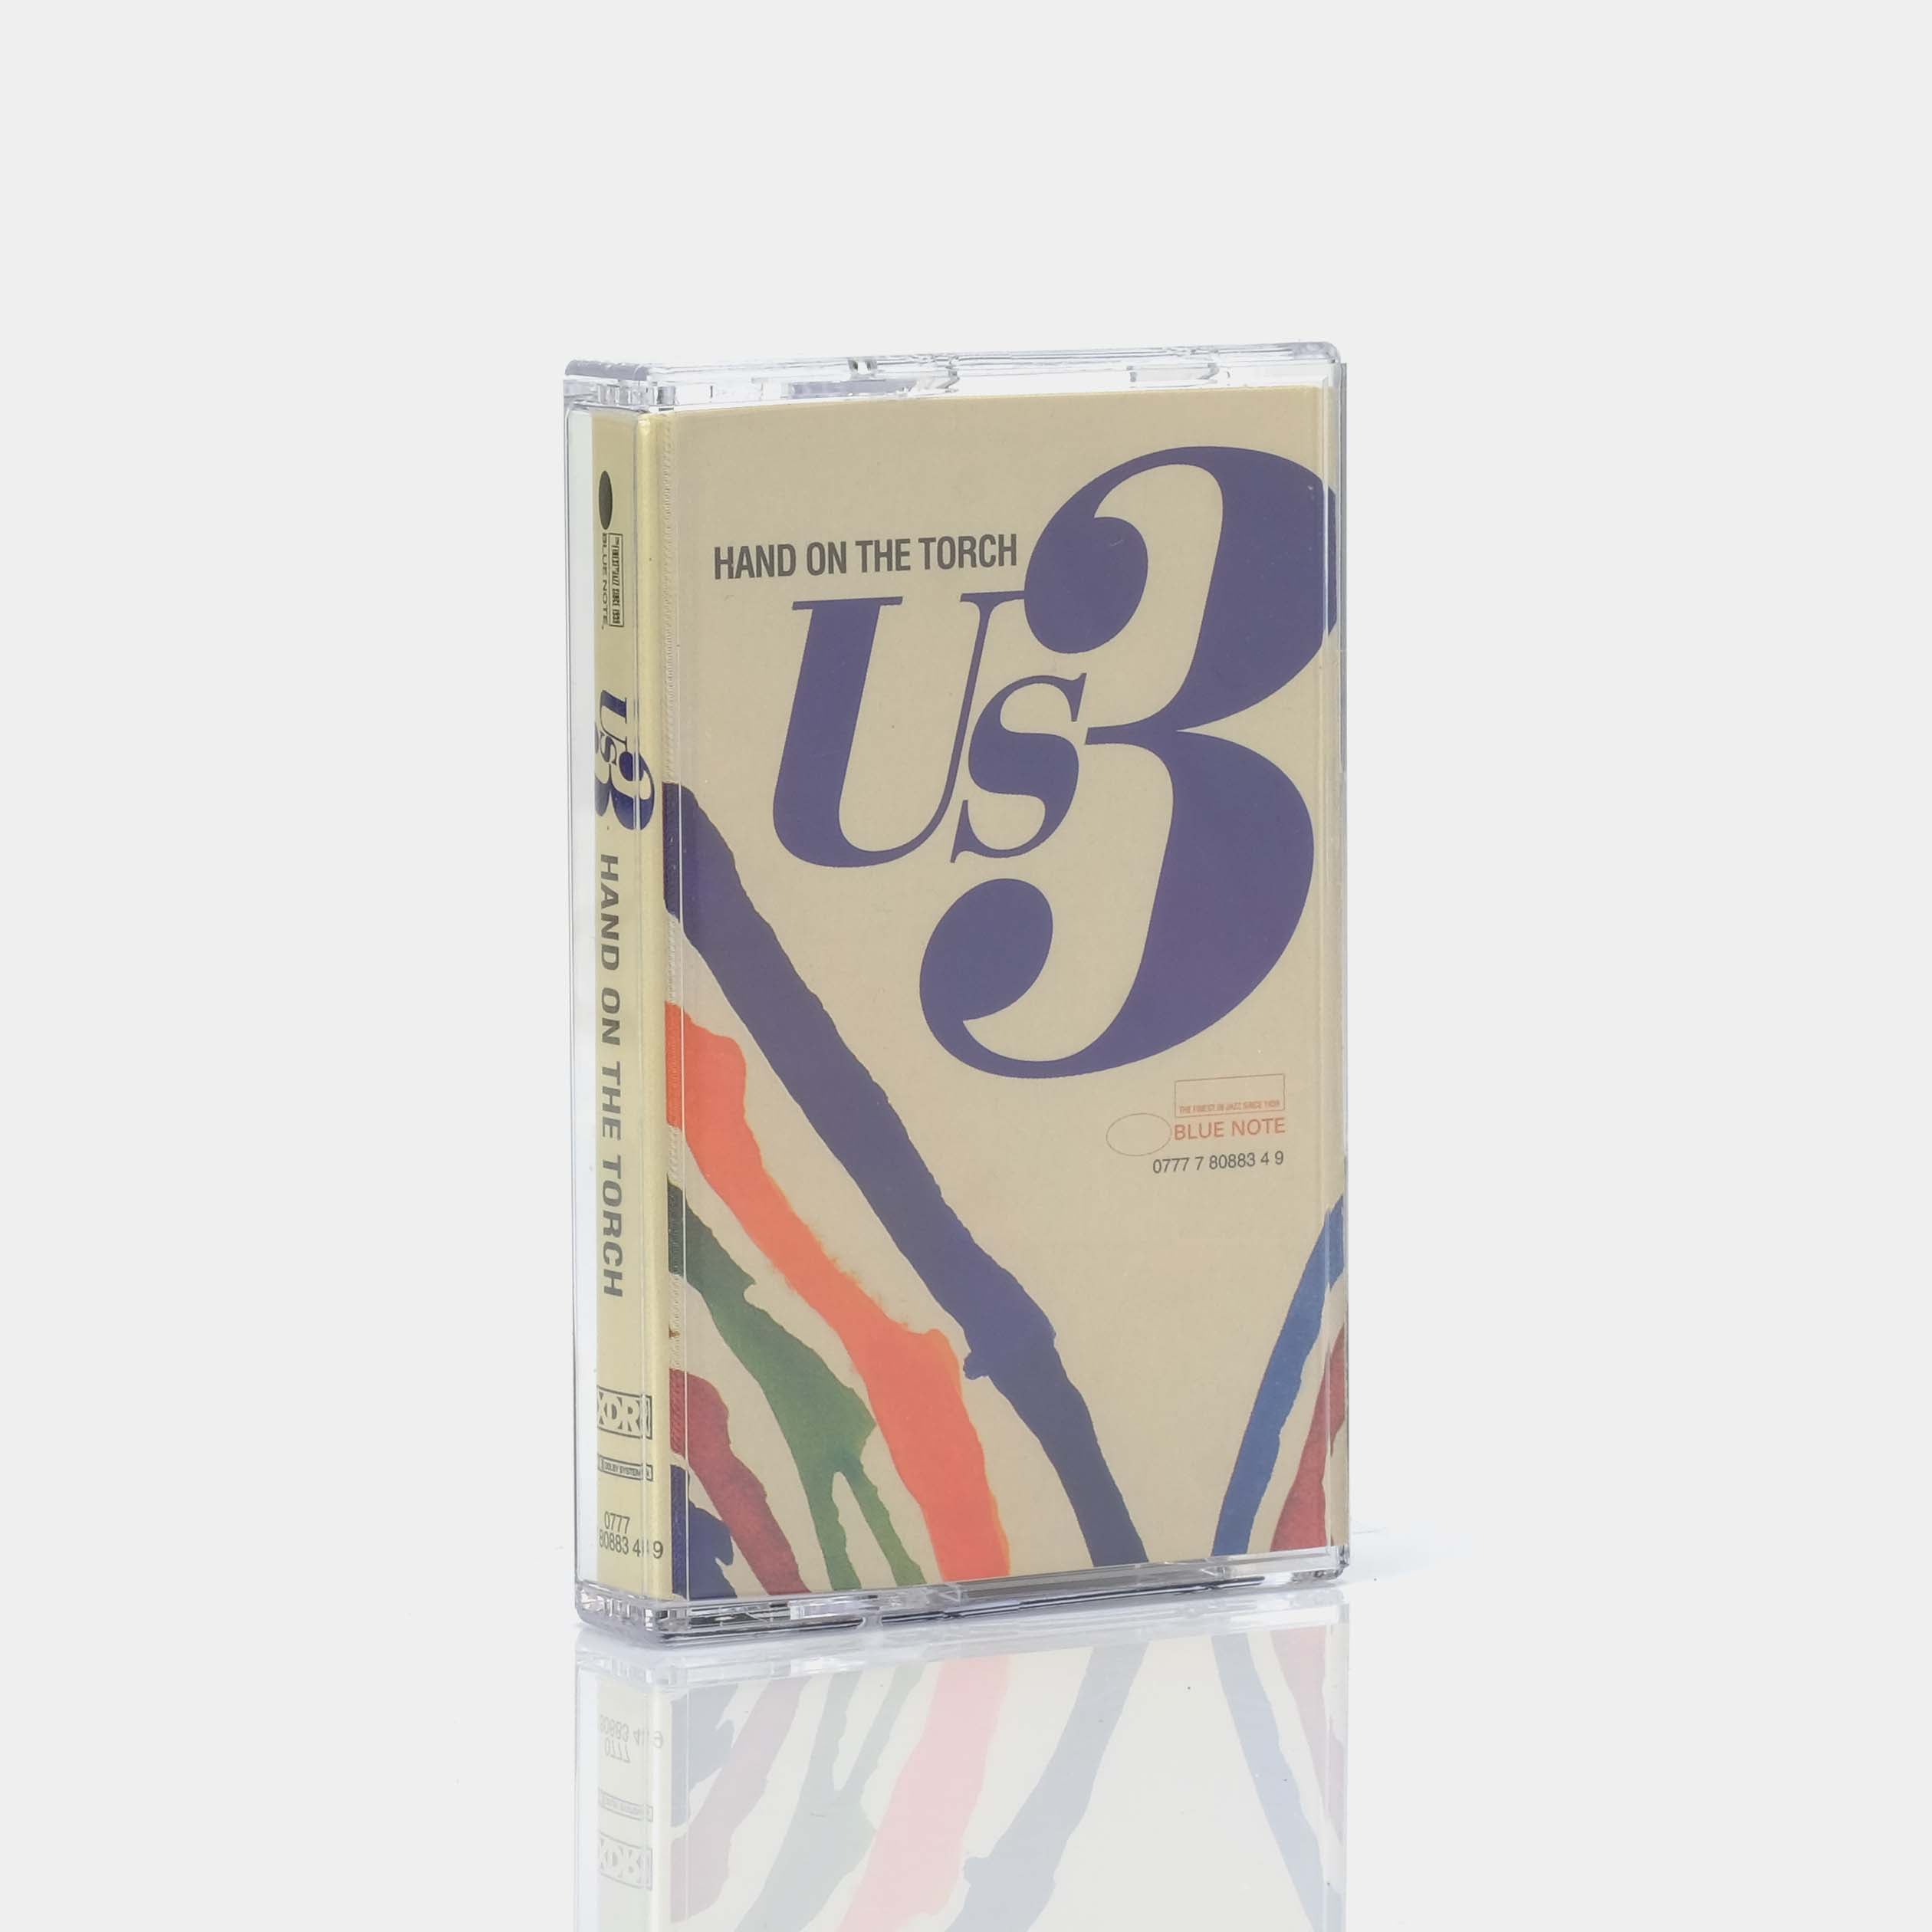 Us3 - Hand On The Torch Cassette Tape